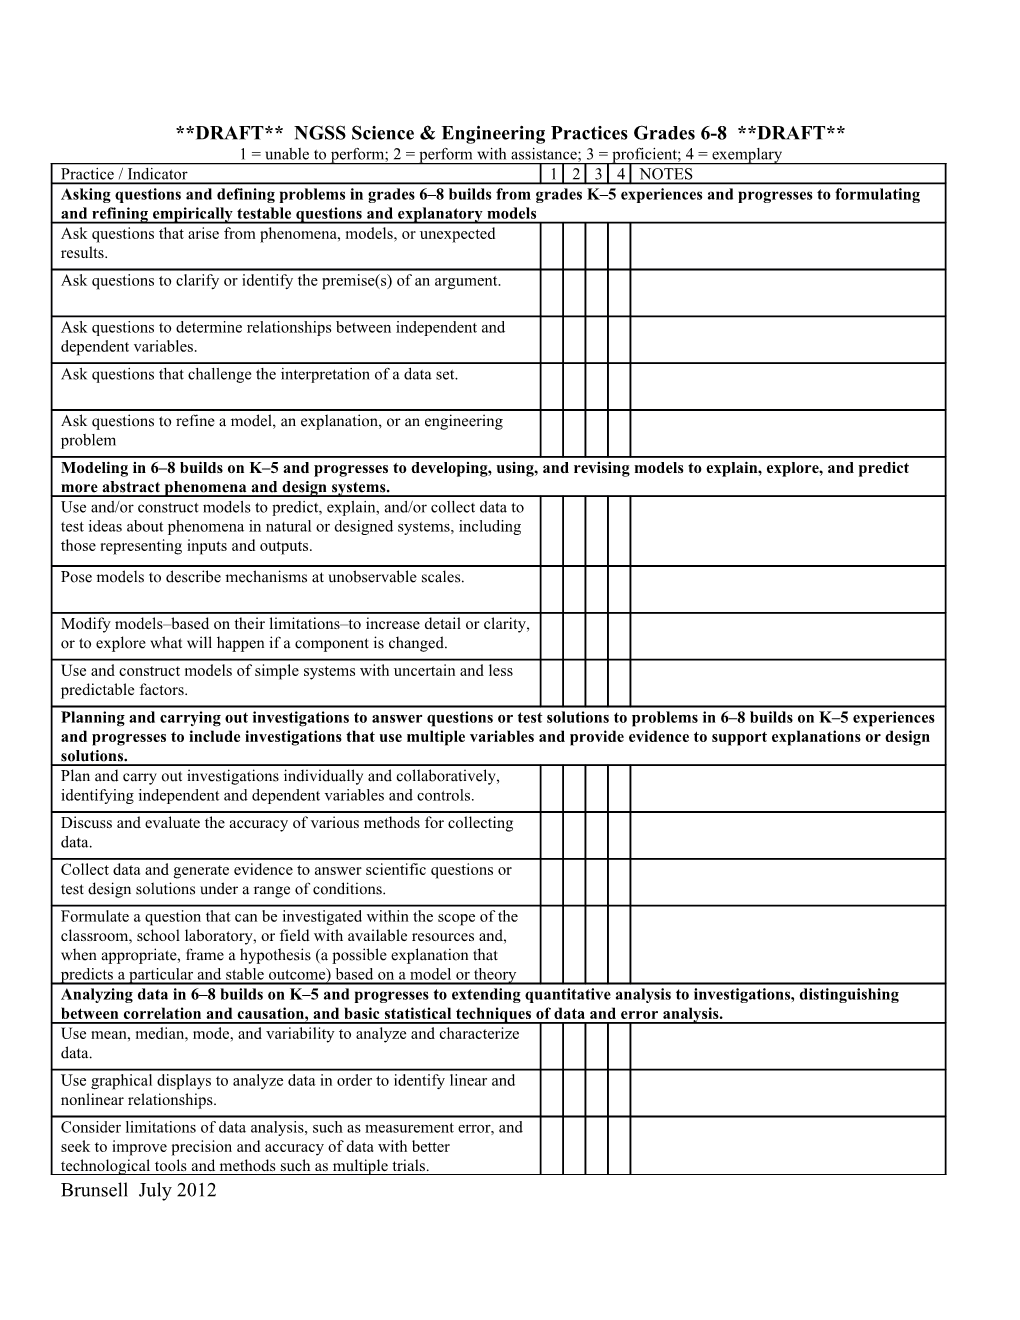 DRAFT NGSS Science & Engineering Practices Grades 6-8 DRAFT